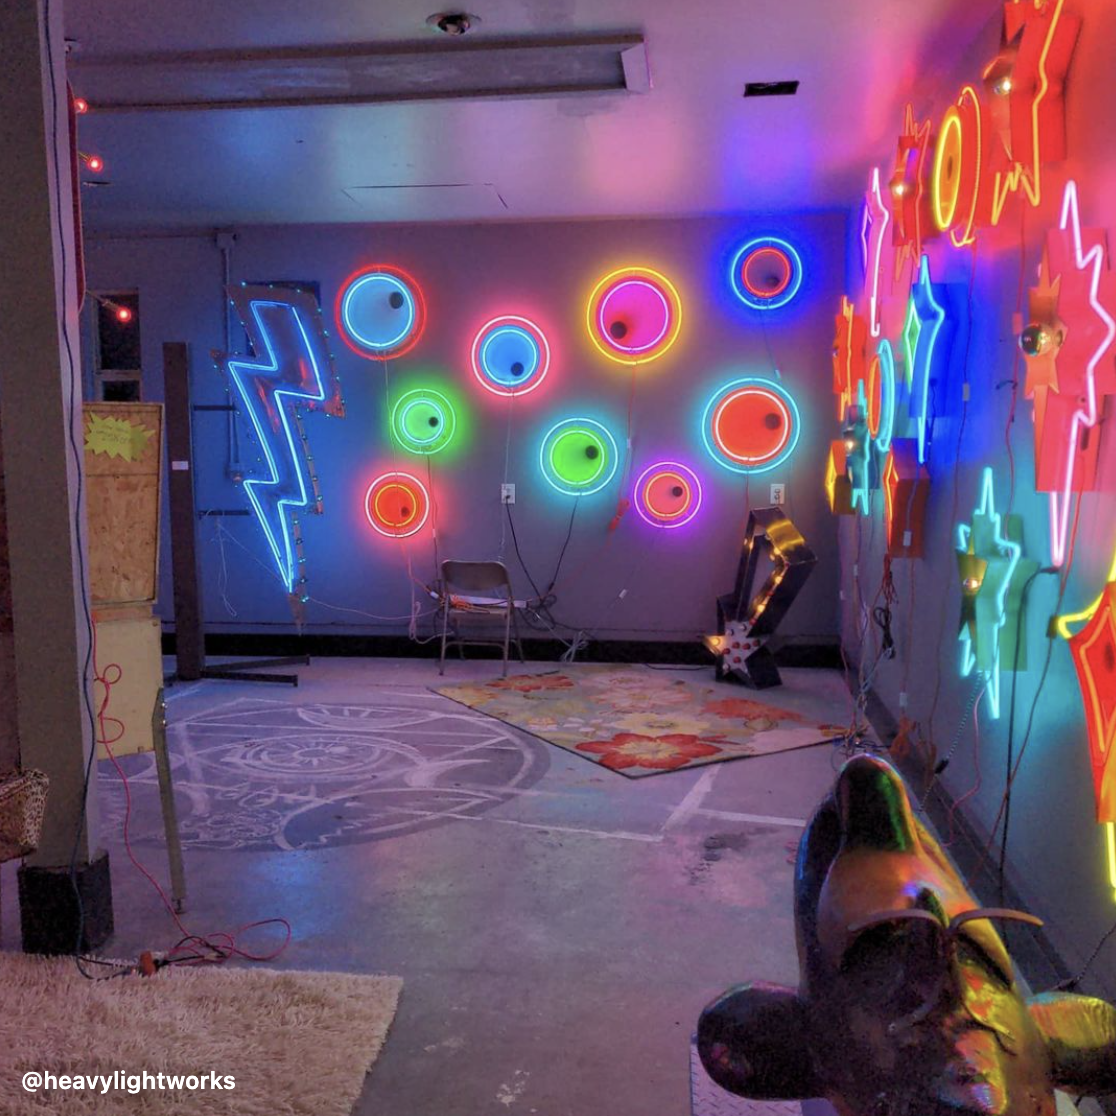 Experience the fun of retro arcade games and neon lights at The Machine SHOP in Langley, Washington - a perfect place to have some quality time with family and friends during your stay at Kindred.